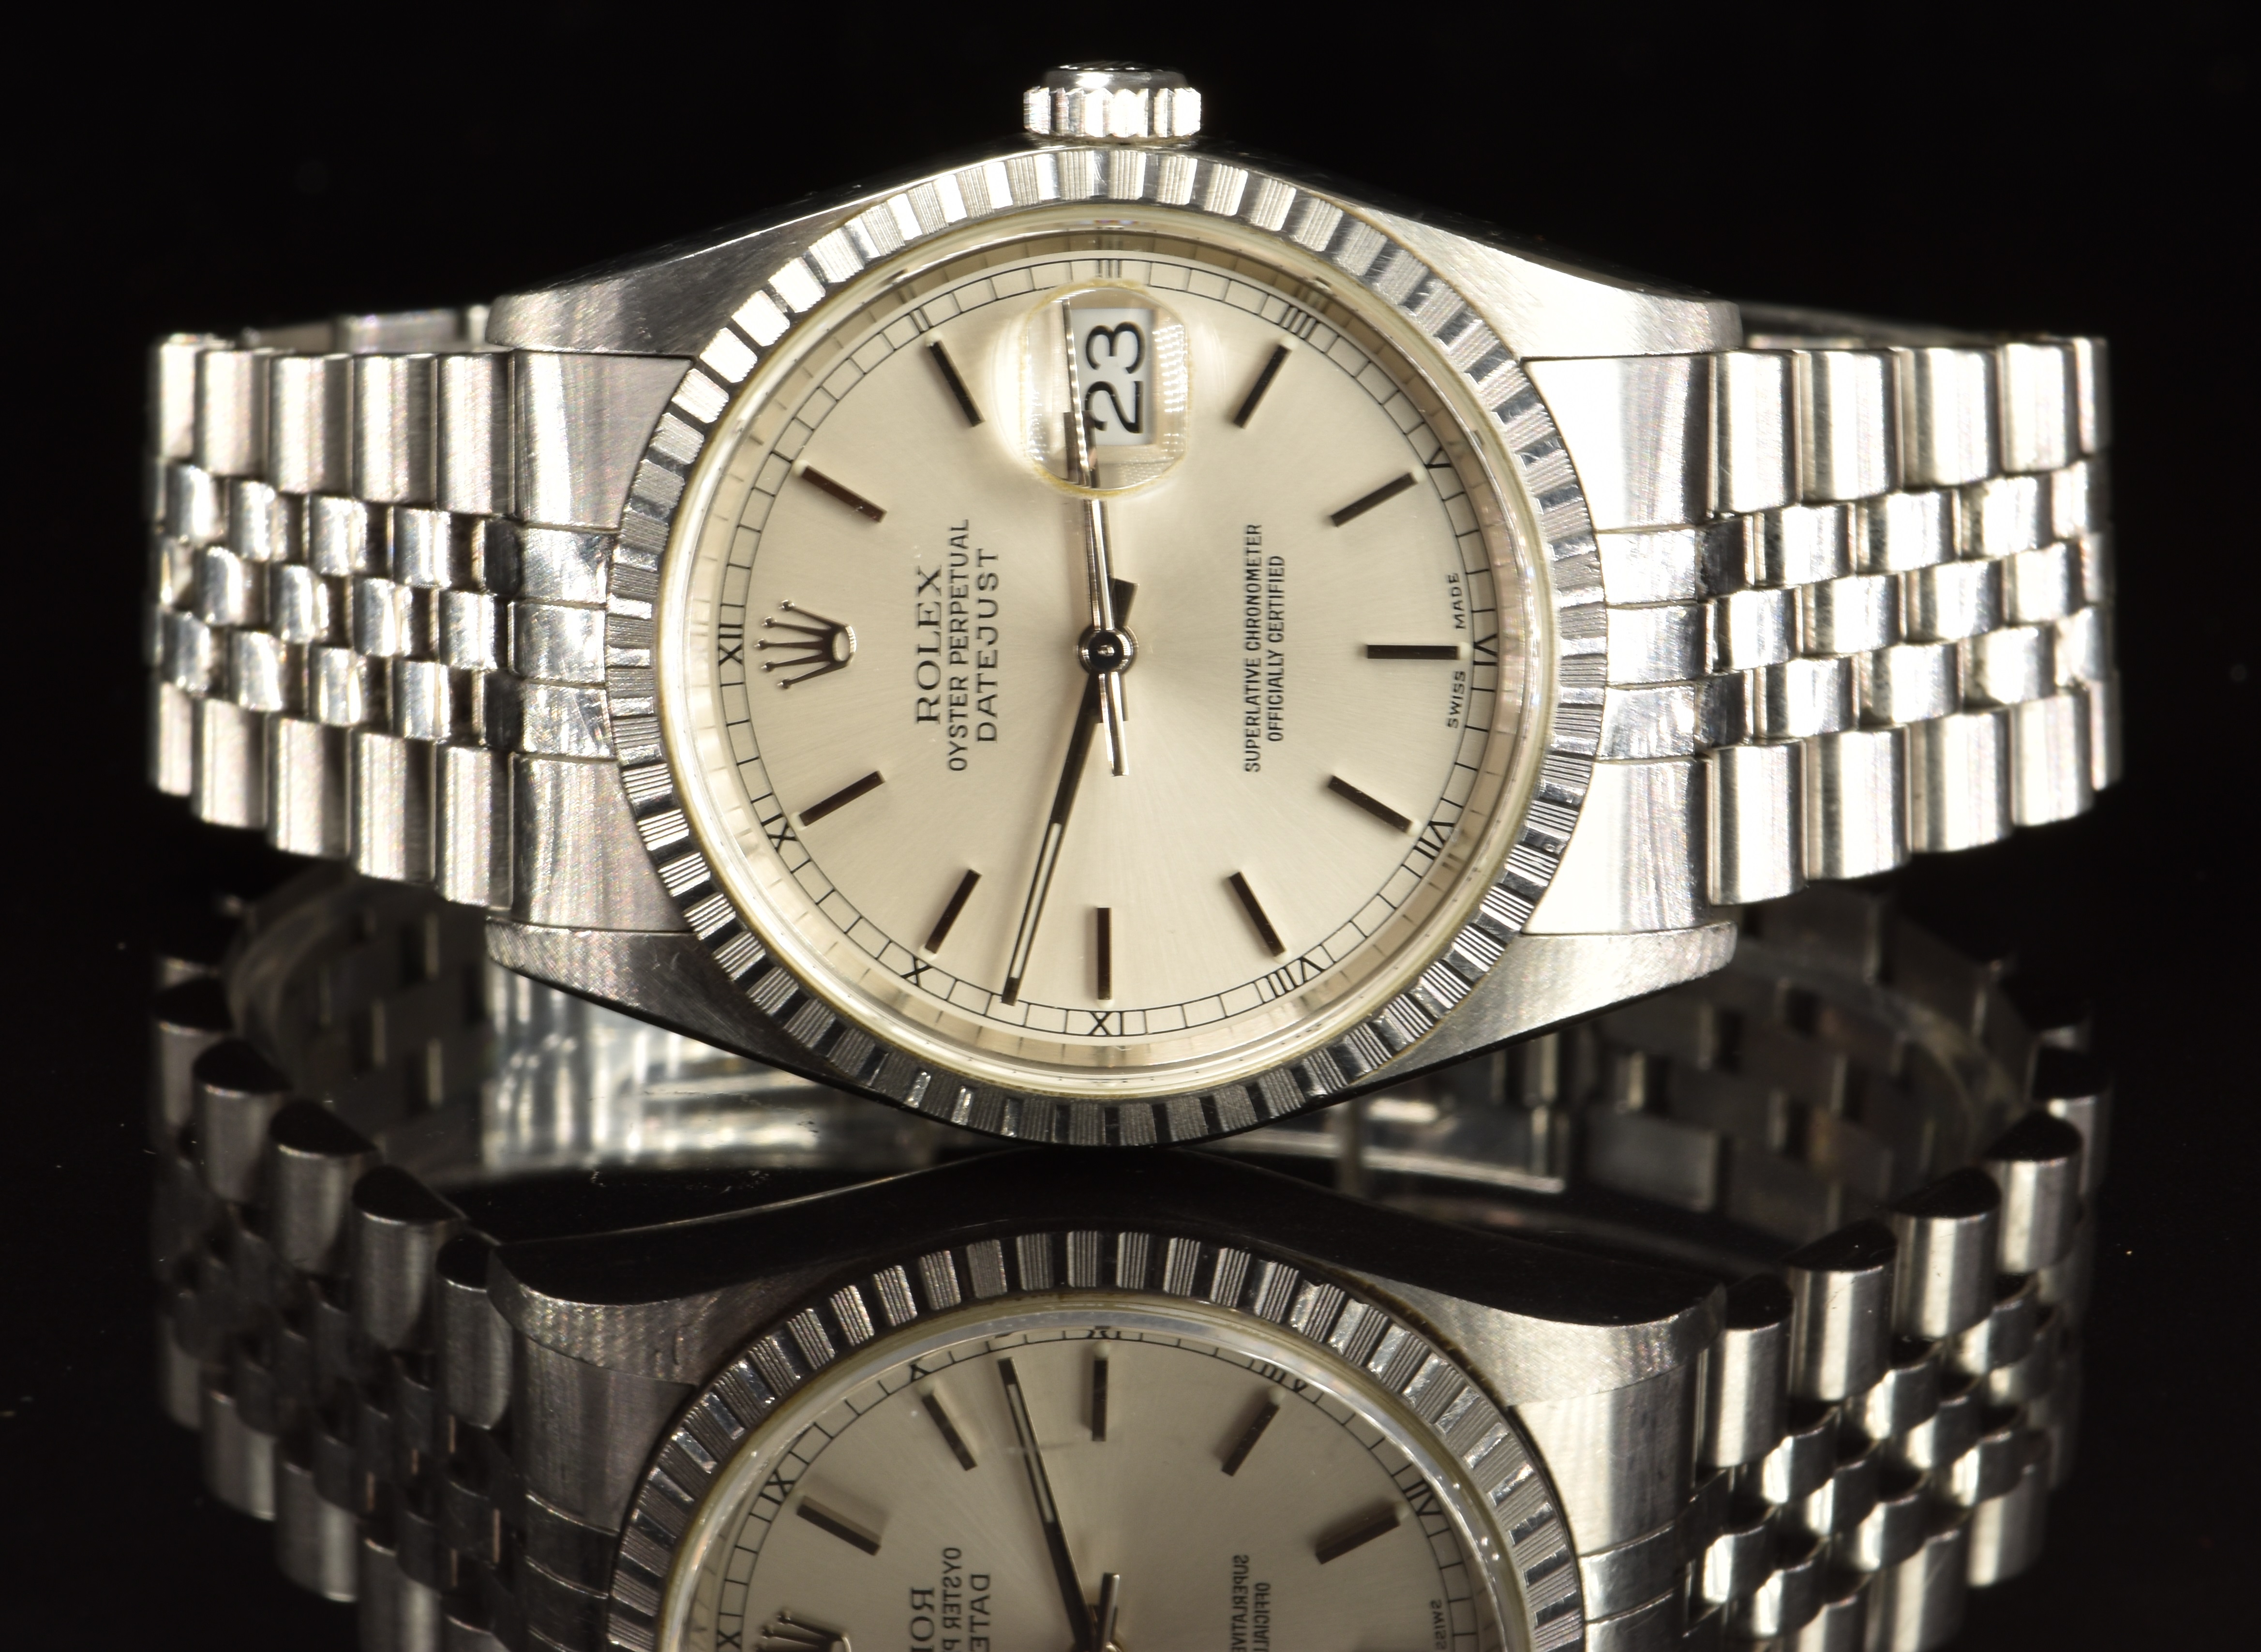 Rolex Oyster Perpetual Datejust gentleman's wristwatch ref. 16220 with date aperture, luminous - Image 7 of 12